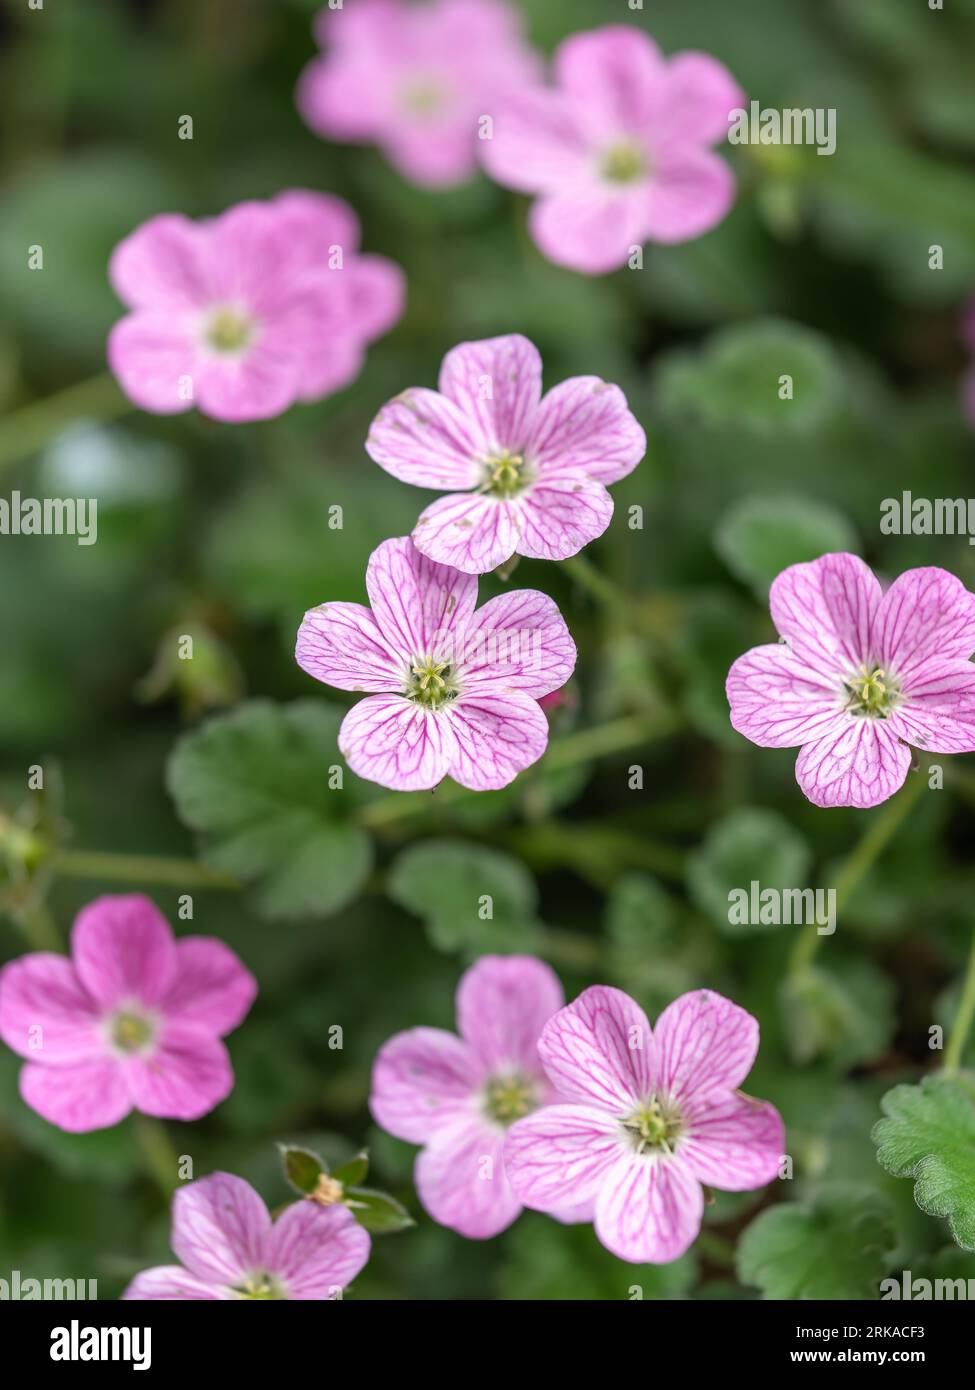 Beautiful macro of the small pink flowers of the Erodium plant. Erodium is a genus of flowering plants in the botanical family Geraniaceae, this is th Stock Photo